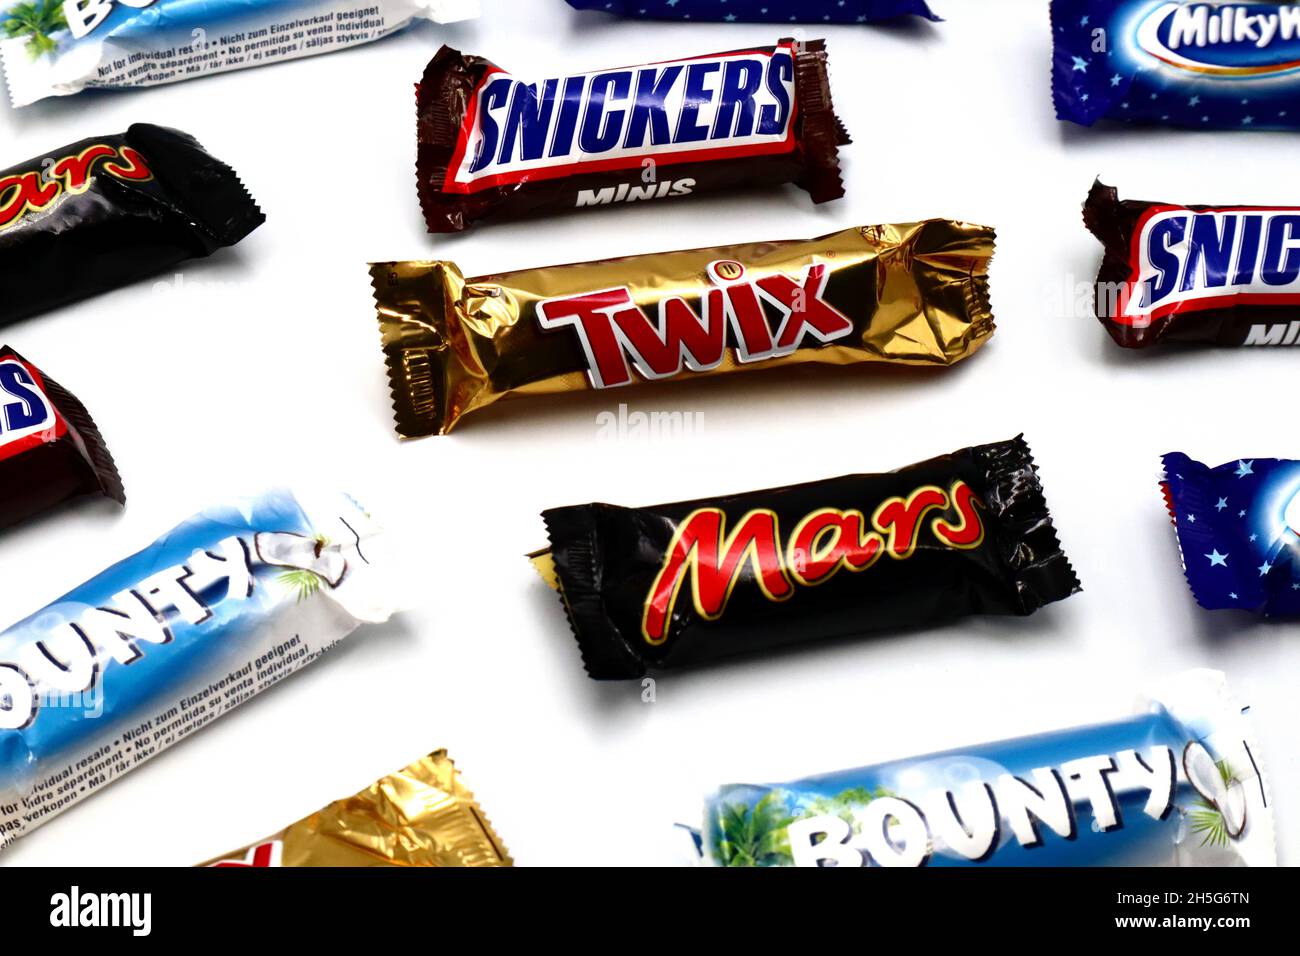 Mars, Bounty, Snickers, Alamy Way Stock of Incorporated Twix Photo Mars bars, - Milky brands and chocolate